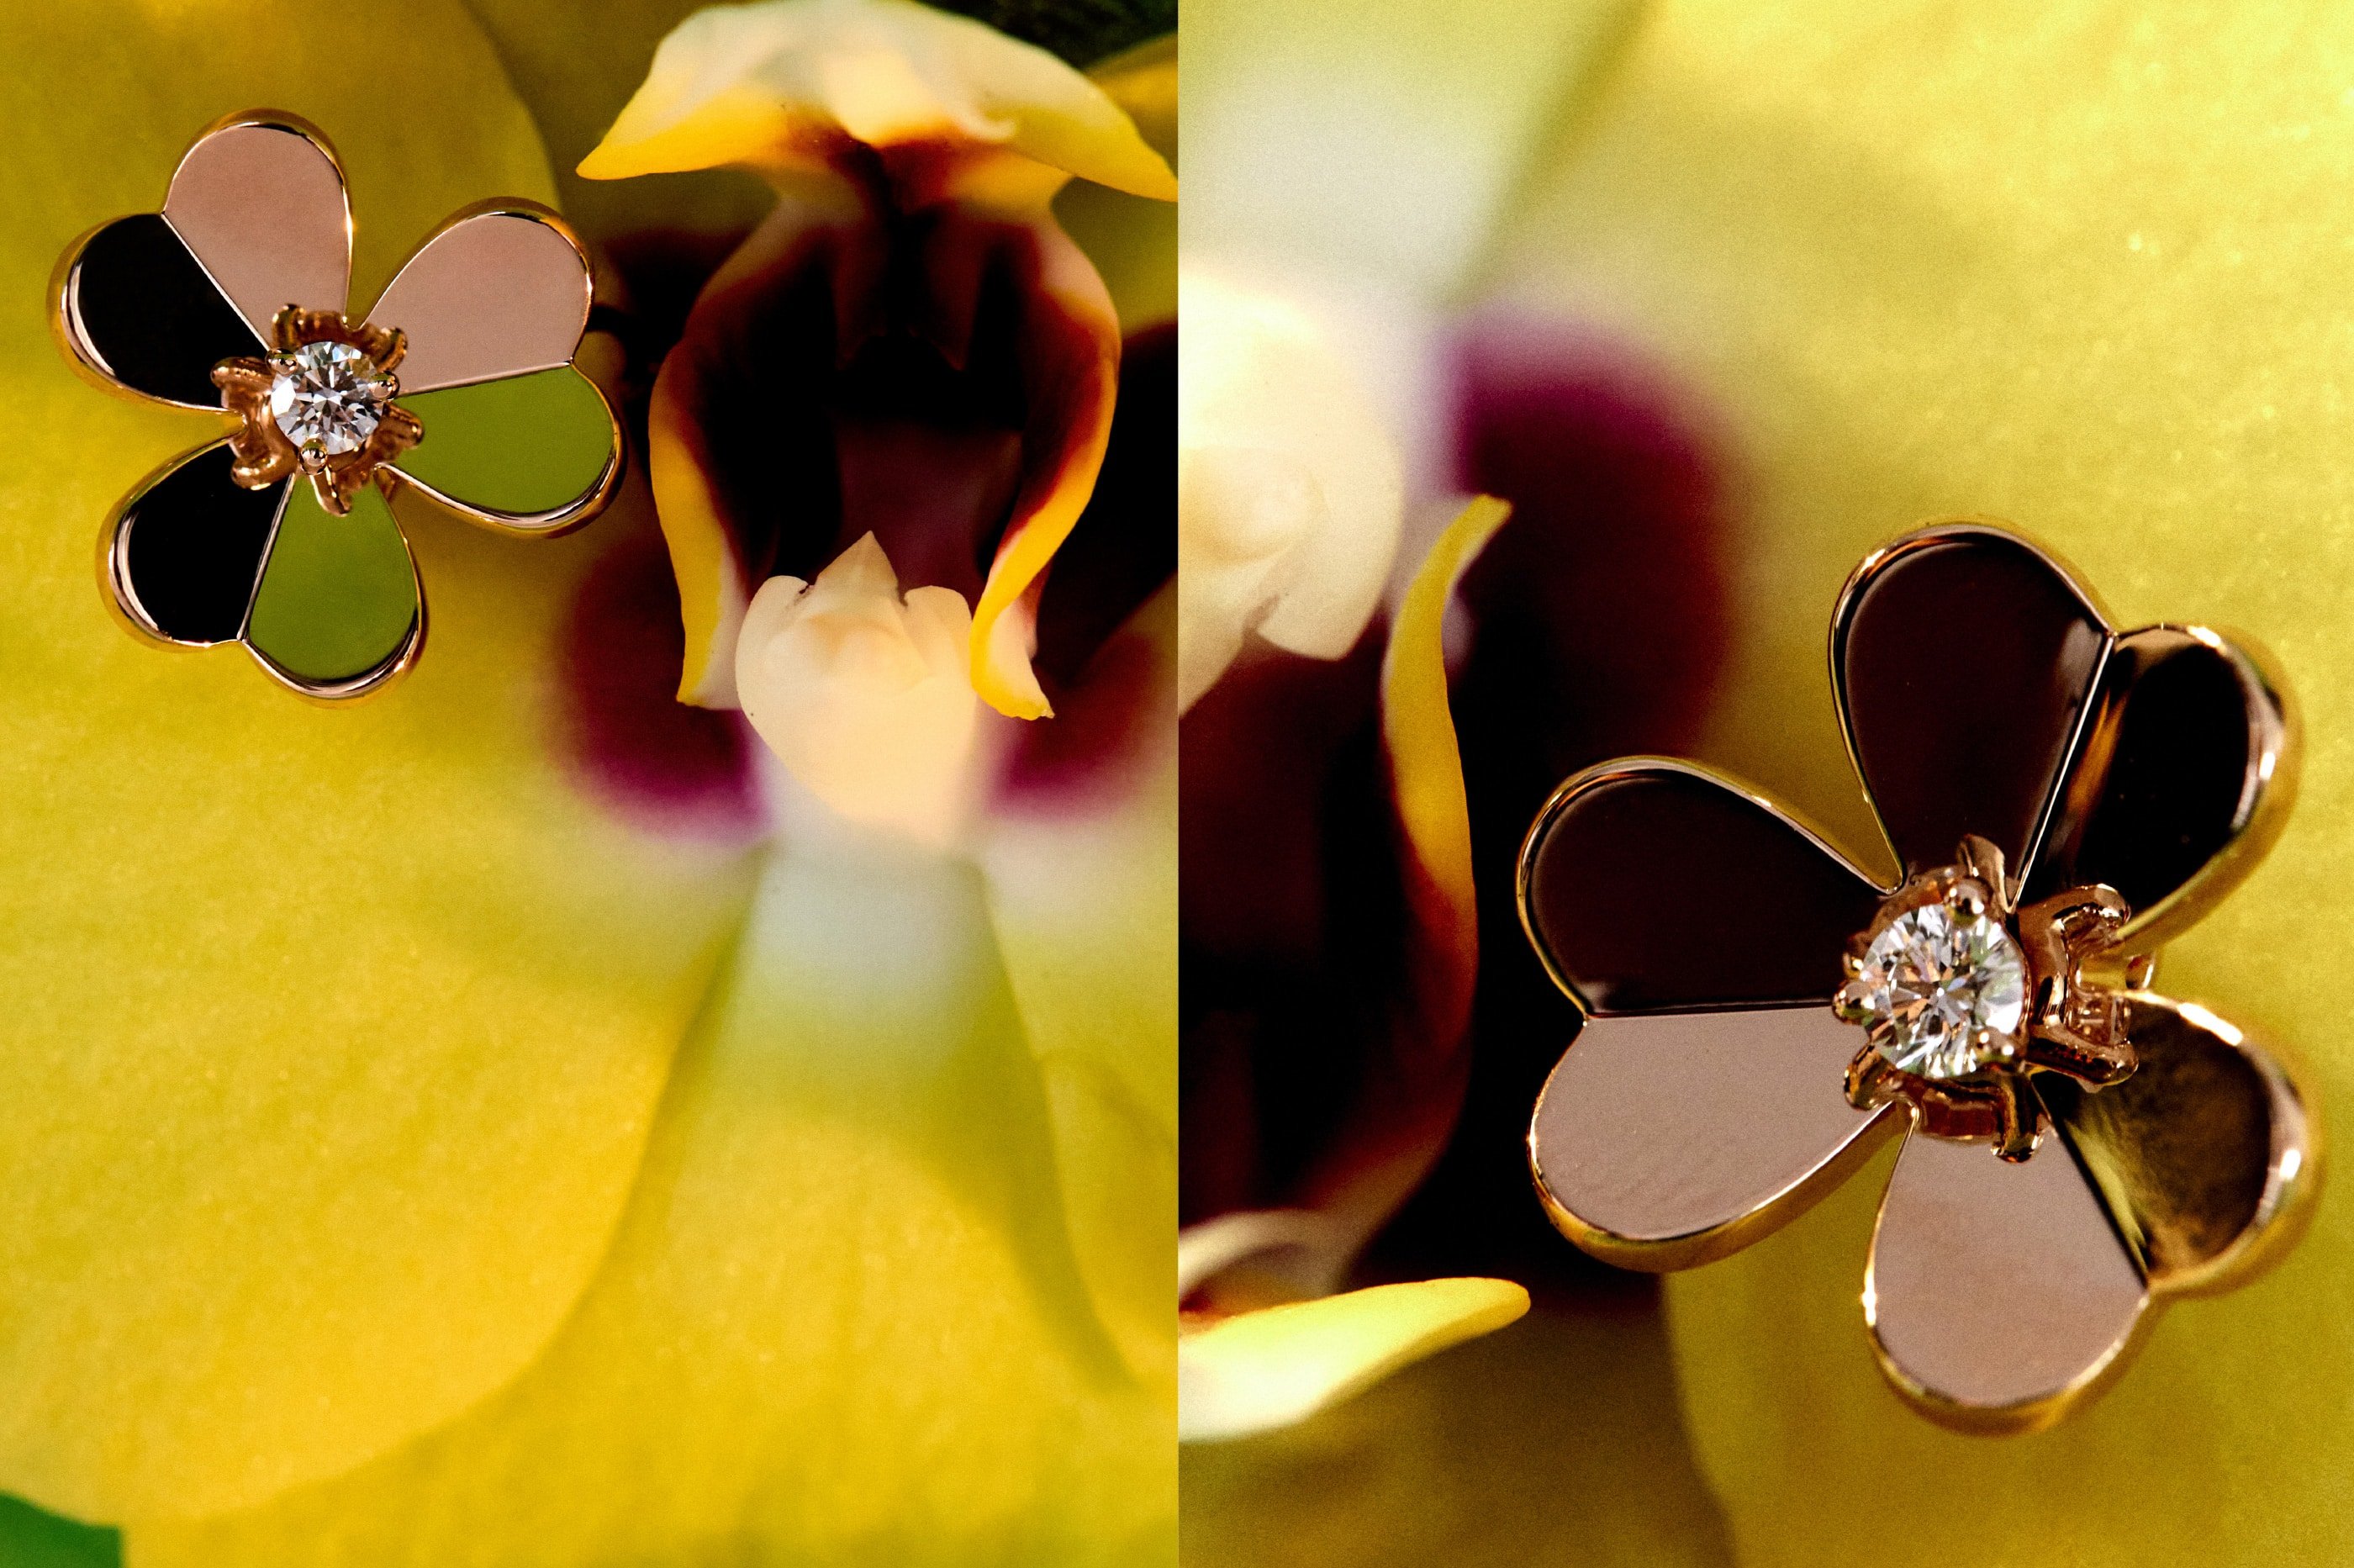 Van Cleef & Arpels' 'Frivole' collection ring and earrings.